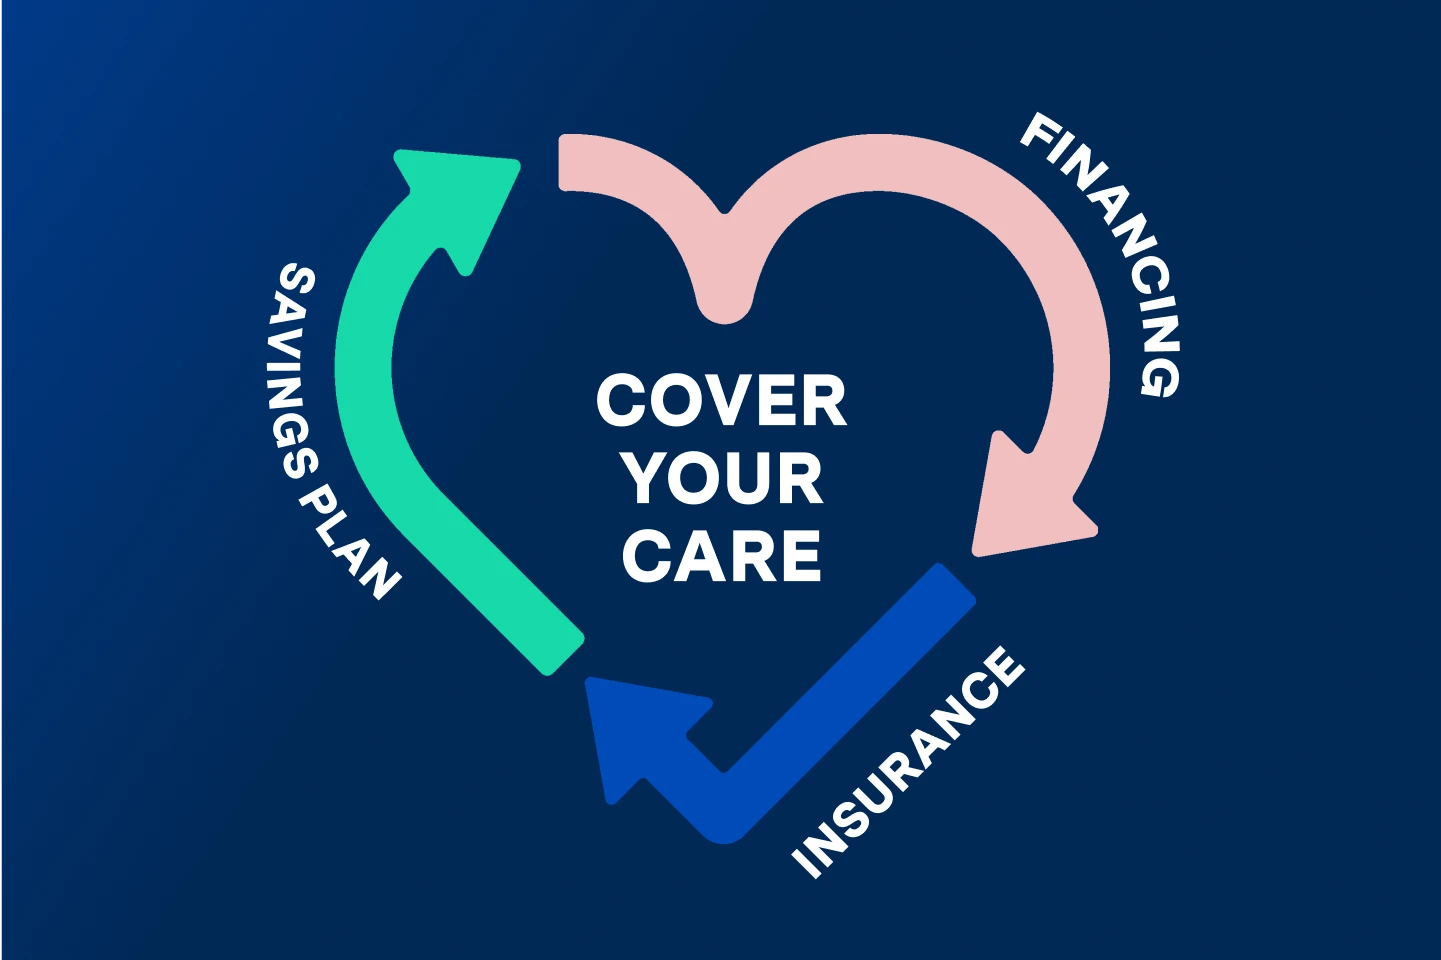 A heart shaped graphic with arrows and the words Cover your care in the center, representing dental financing options available at Aspen Dental link:
Aspen Dental Savings Plan
Dental Financing and
Dental Insurance